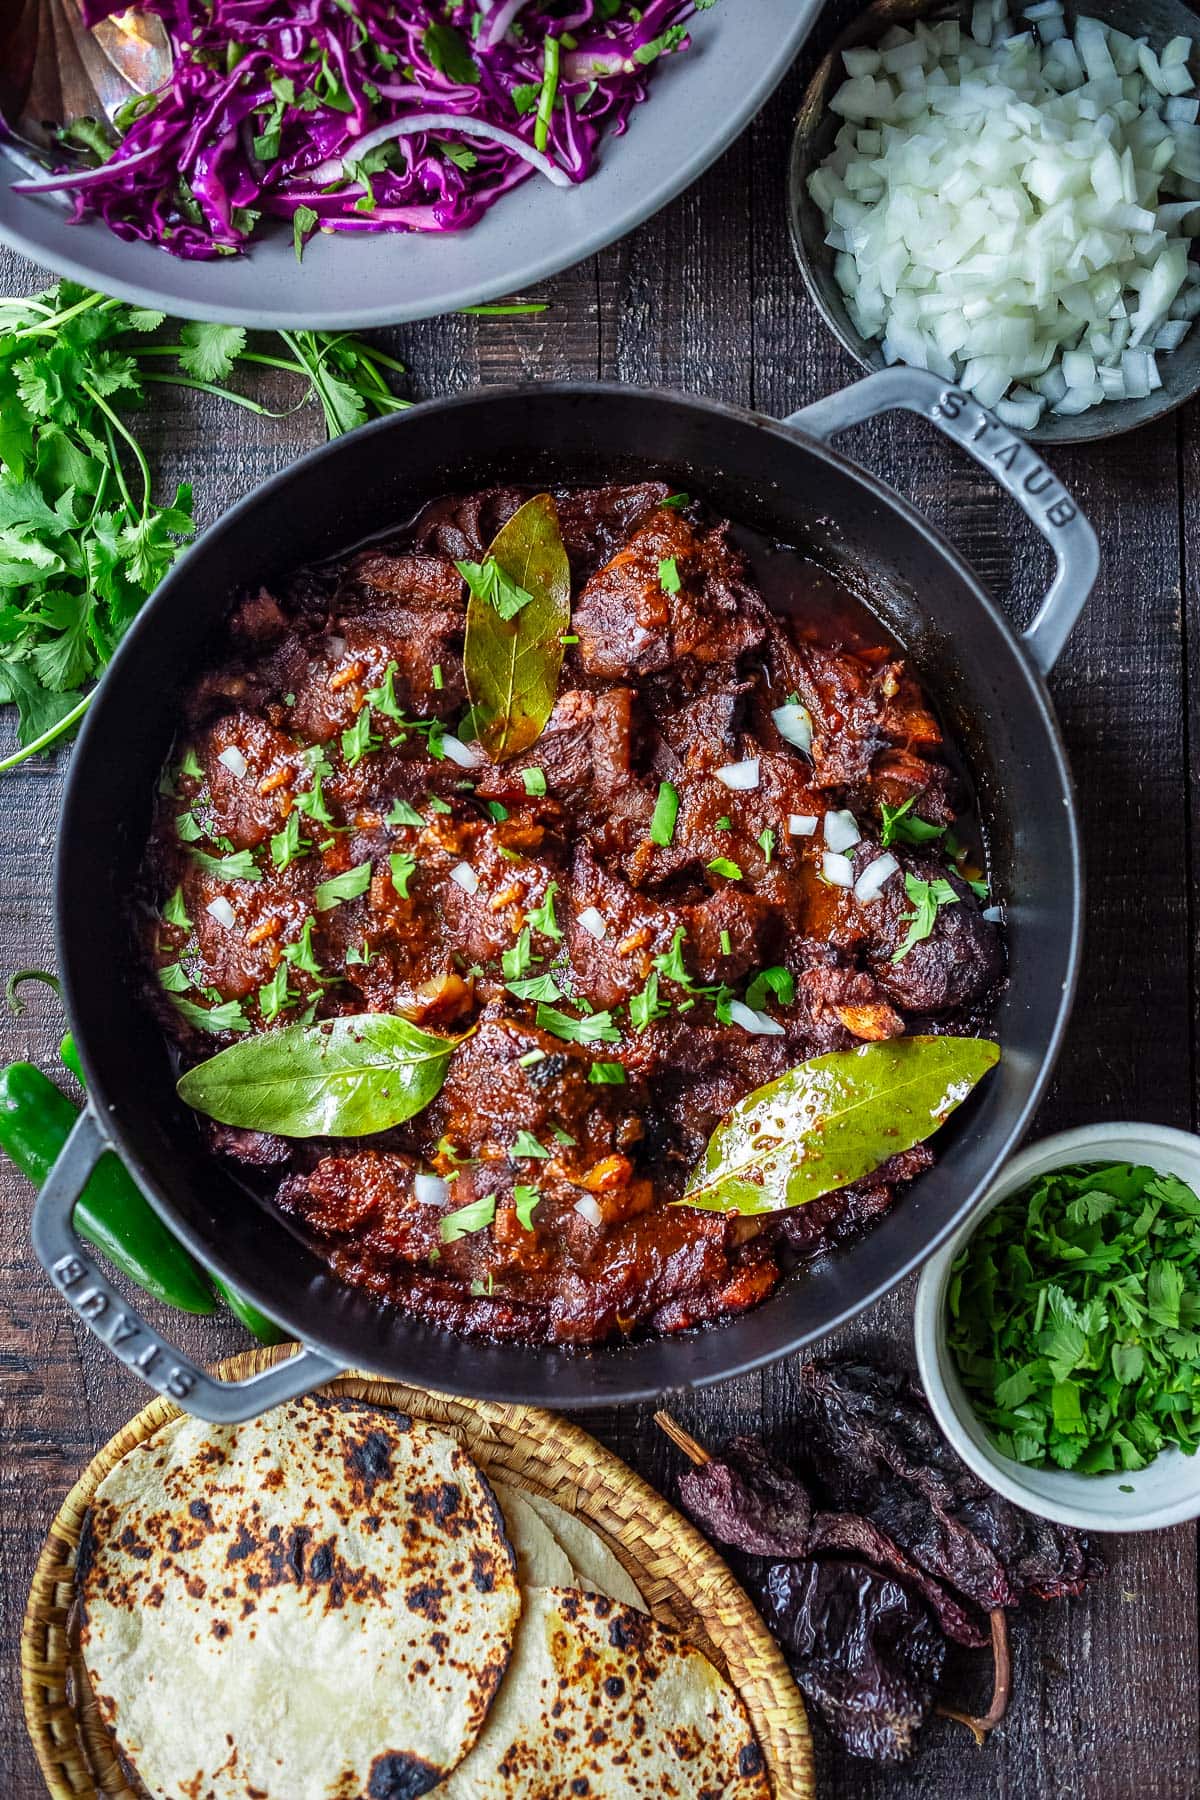 This simple, delicious Barbacoa recipe hails from the Oaxacan region of Mexico, resulting in the most flavorful,  tender, fall-off-the-bone meat. Slow roast it in your oven or use a slow cooker. Perfect in tacos or burritos. 